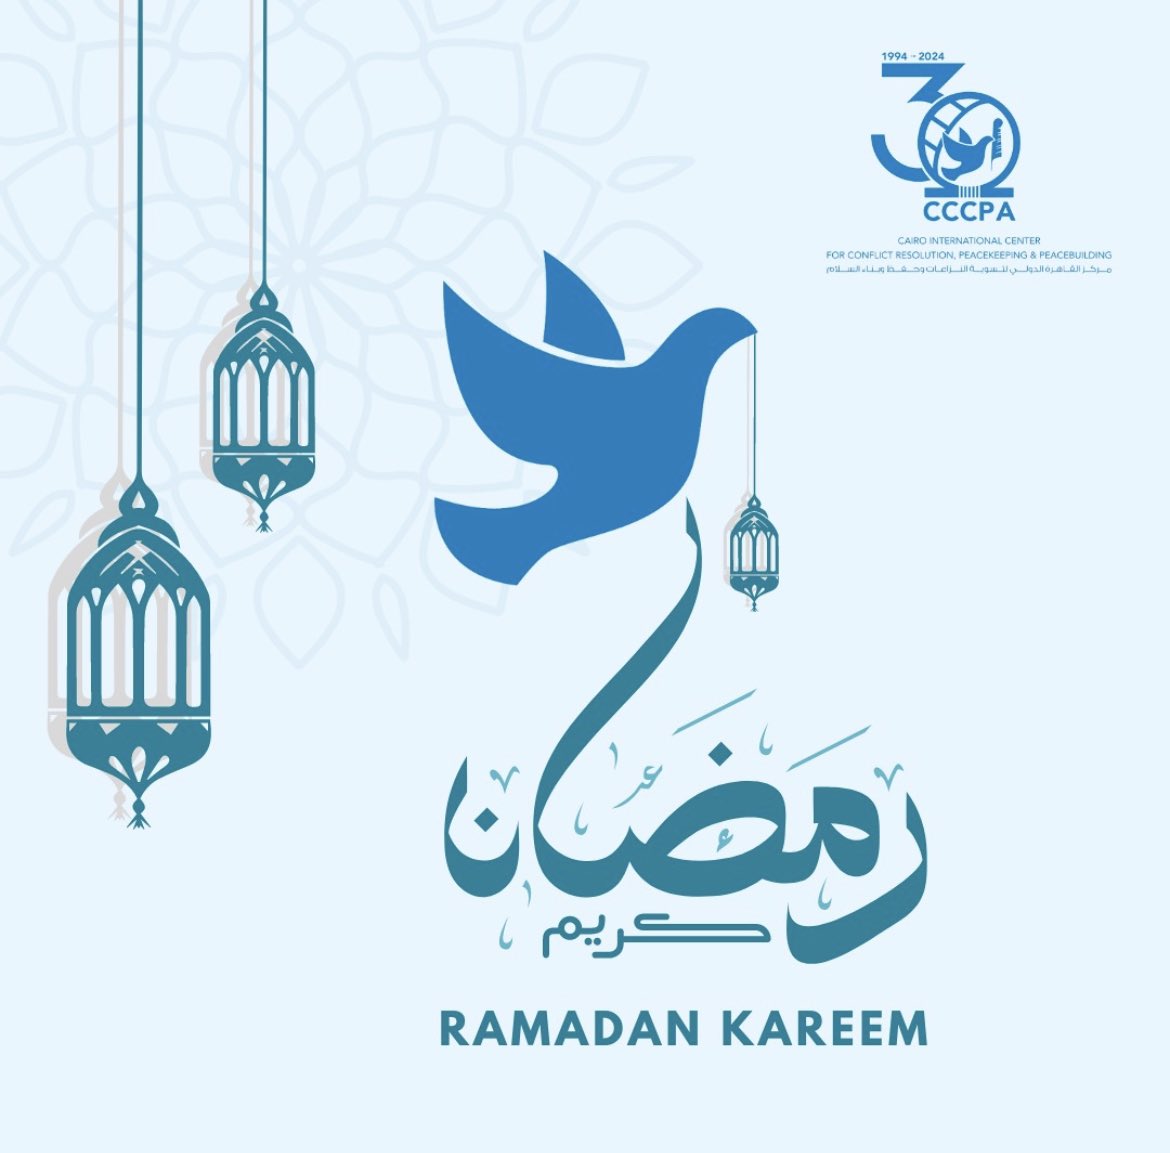 #CCCPA wishes you a #peaceful and #blessed month of #Ramadan2024 #رمضان_كريم #RamadanKareem